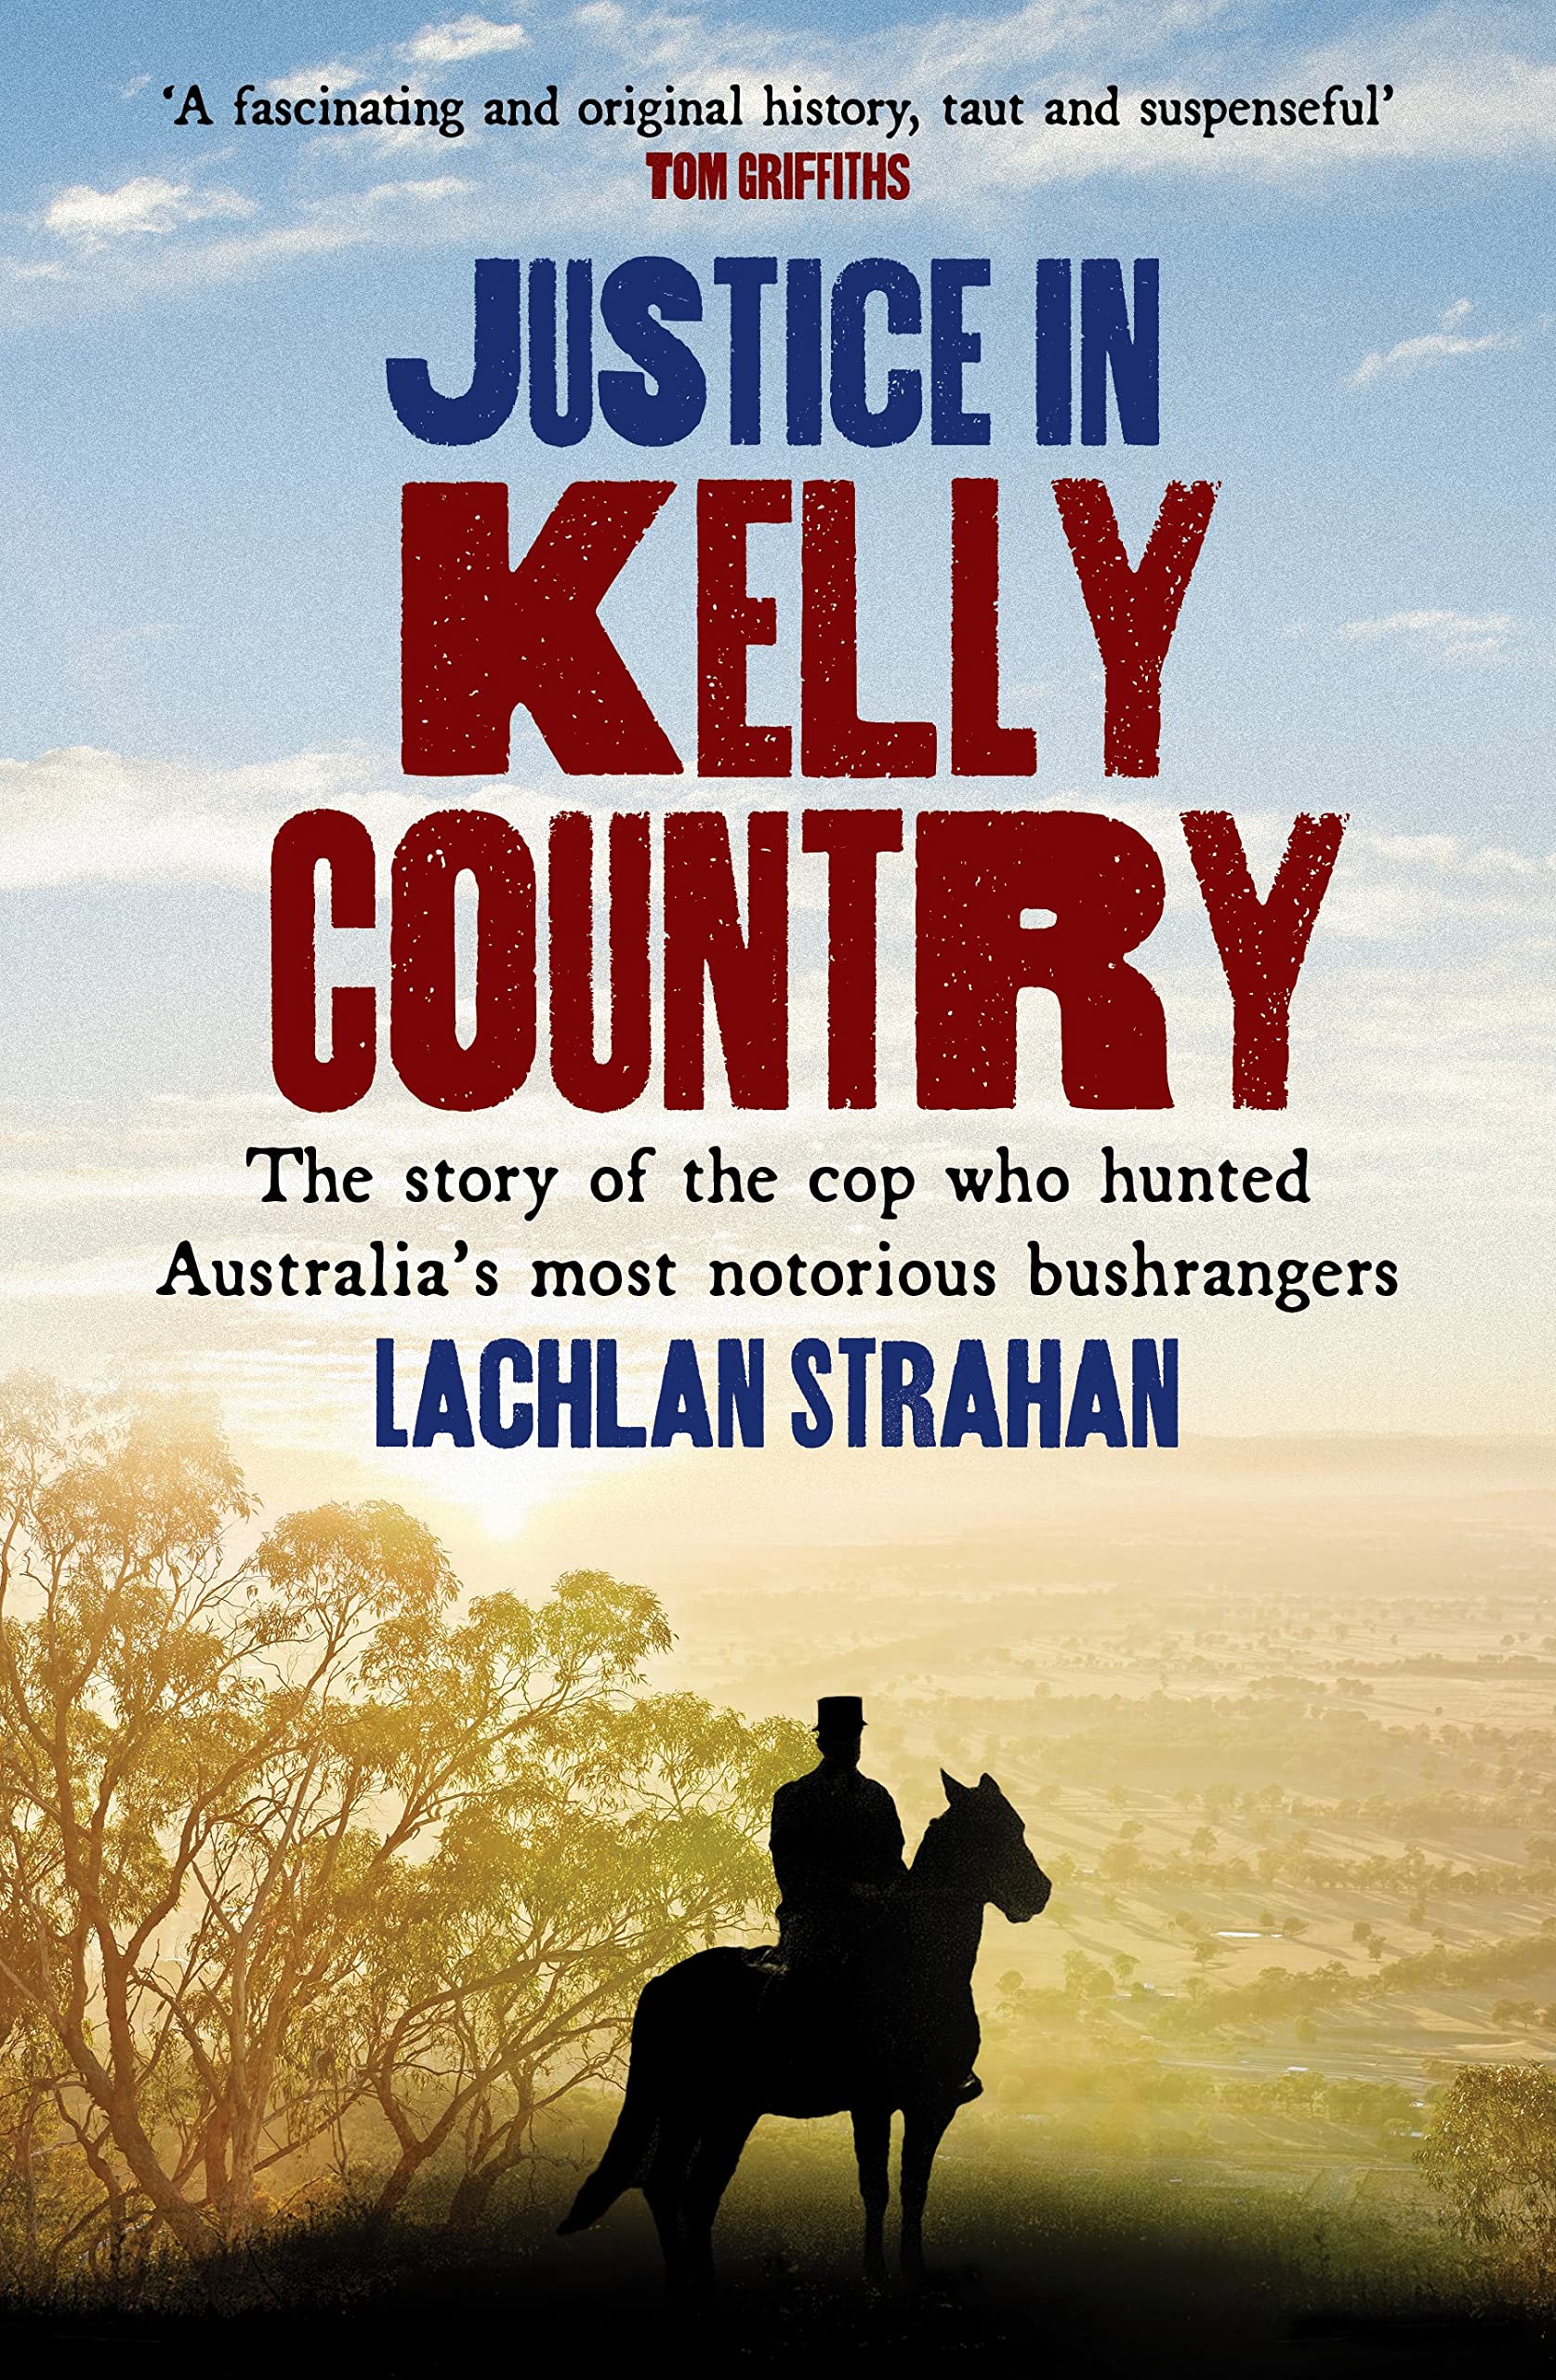 Justice in Kelly Country: The Story of the Cop Who Hunted Australia's Most Notorious Bushrangers